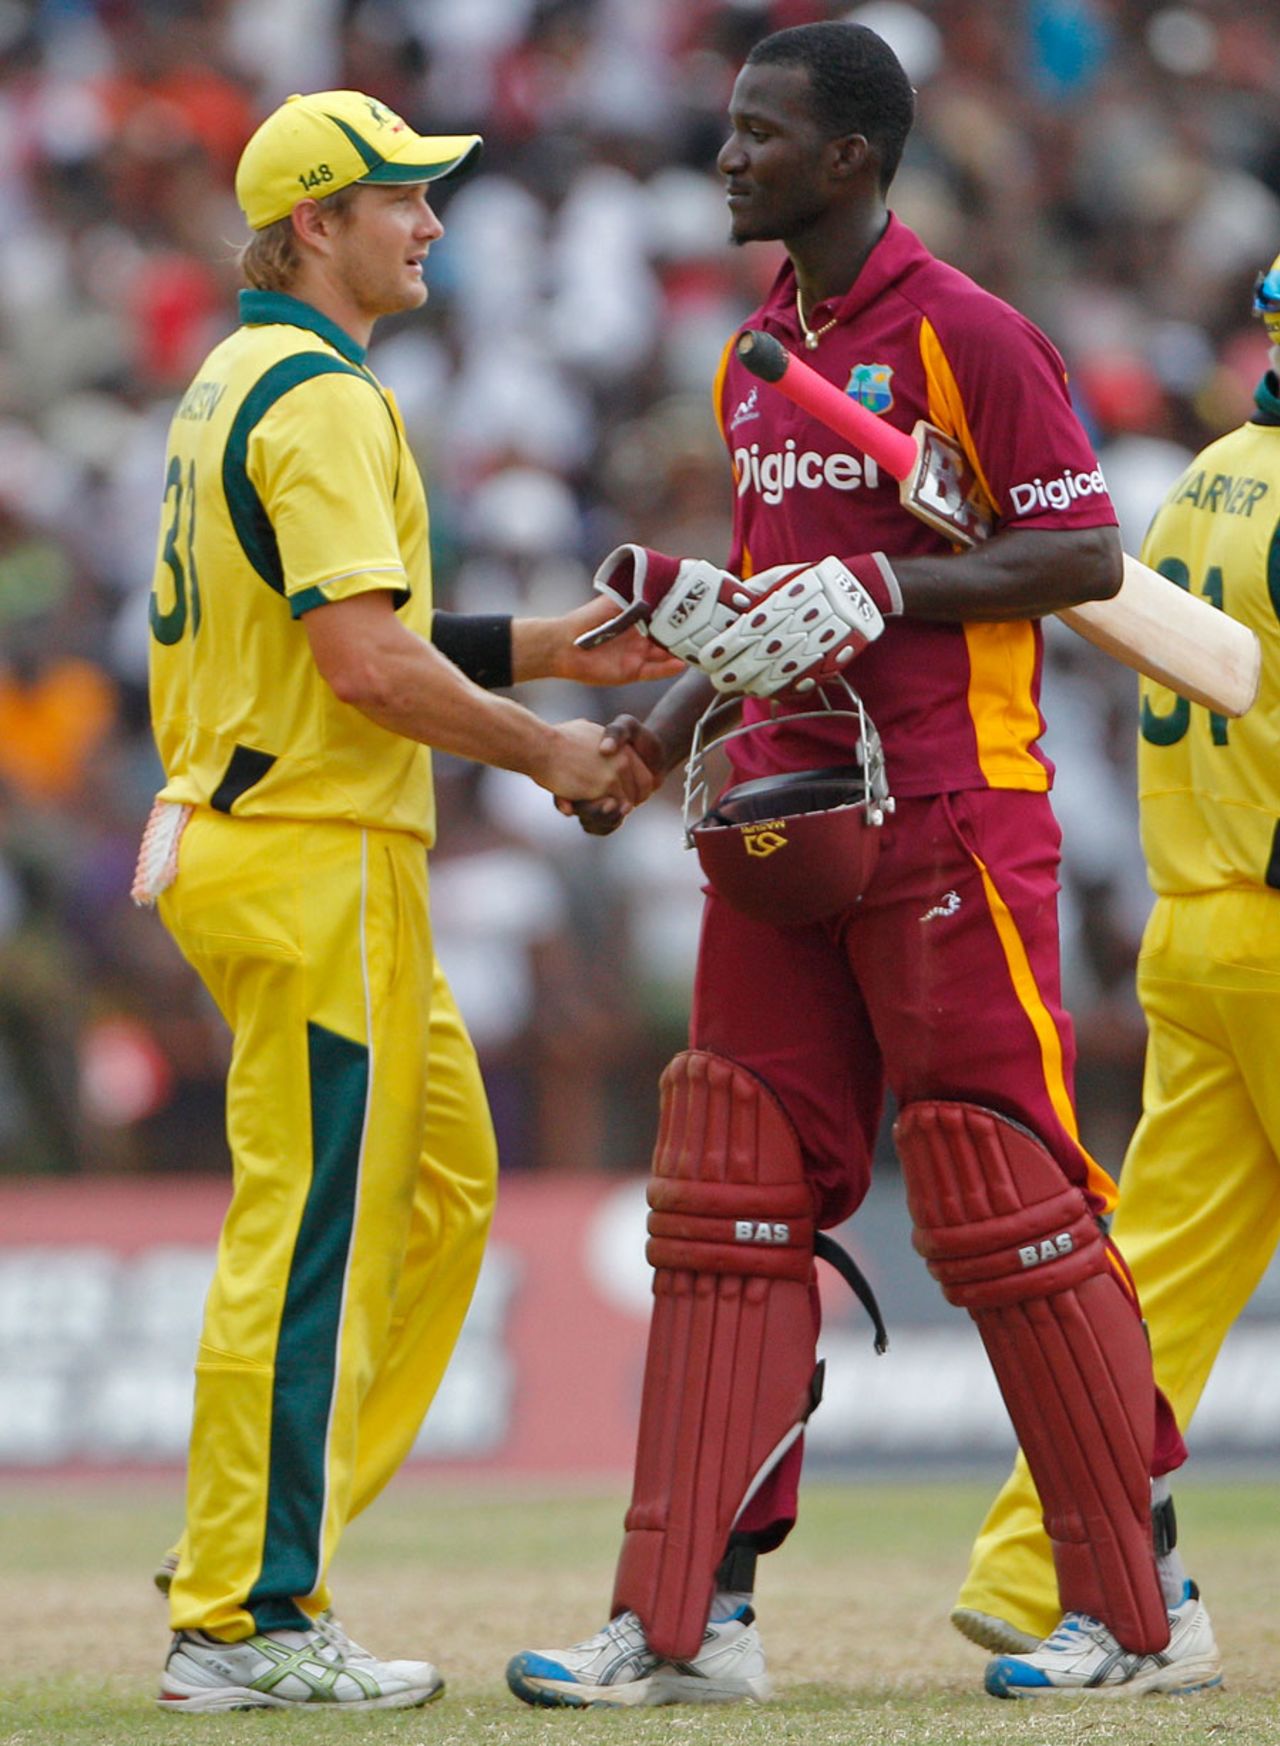 Shane Watson and Darren Sammy shake hands after the game is tied, West Indies v Australia, 3rd ODI, St Vincent, March 20, 2012